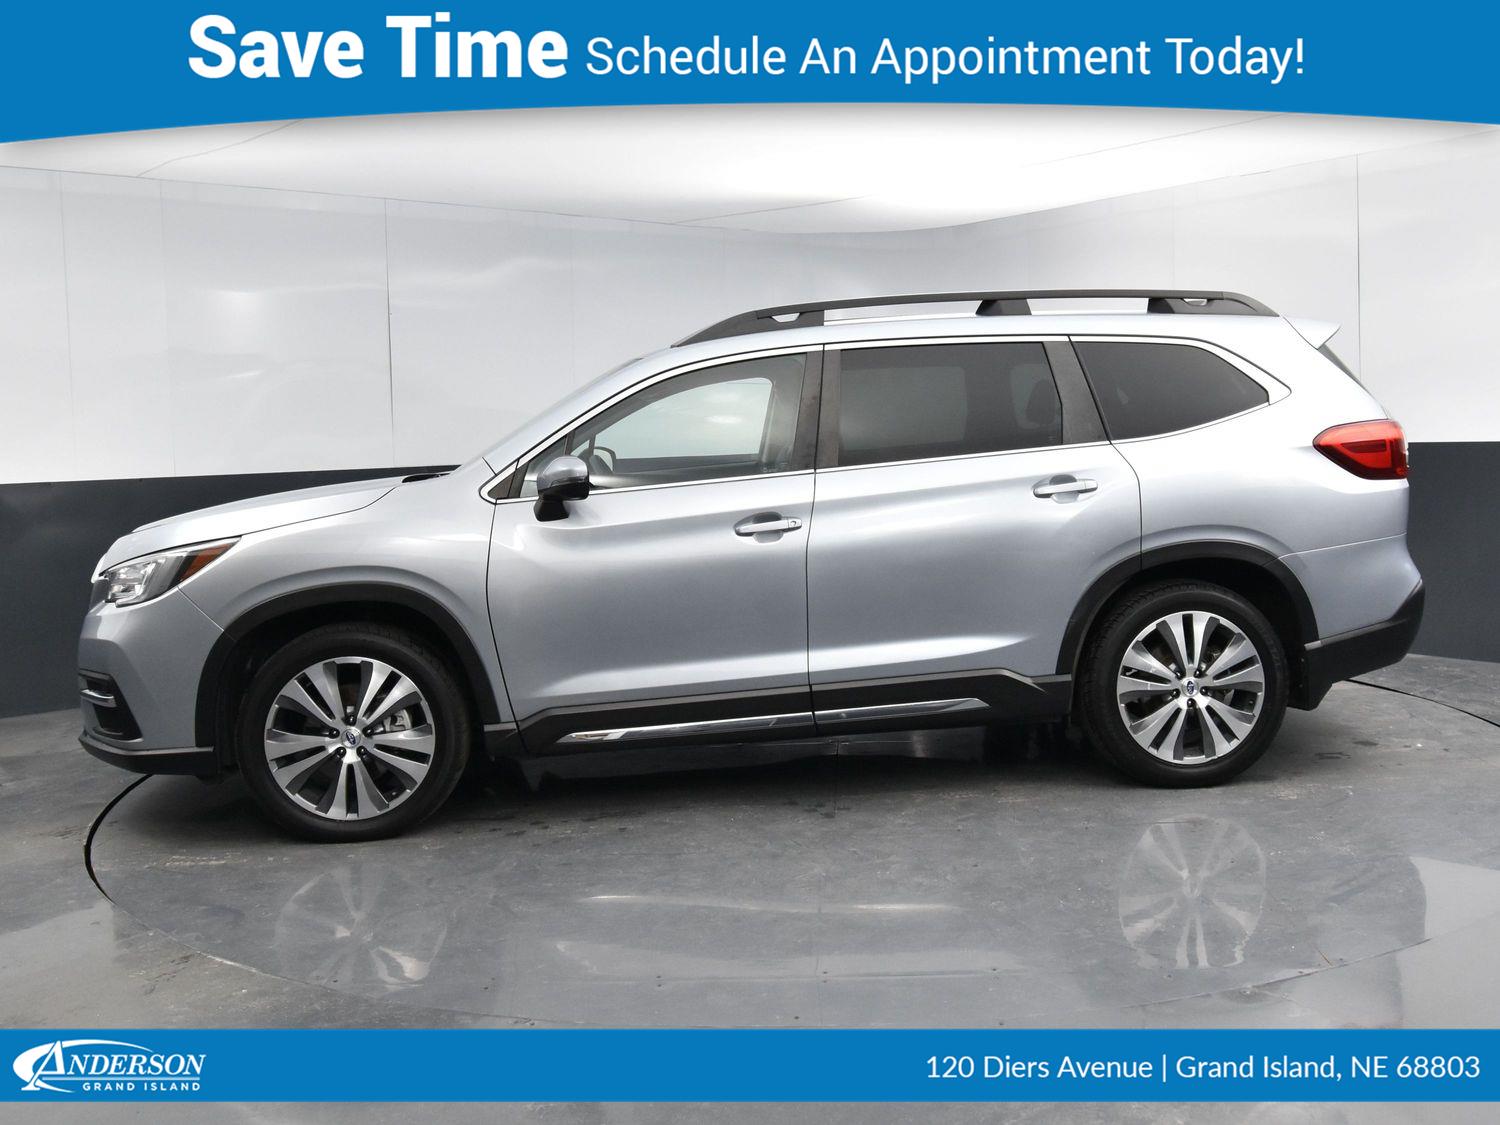 Used 2019 Subaru Ascent Limited Stock: 2000808A